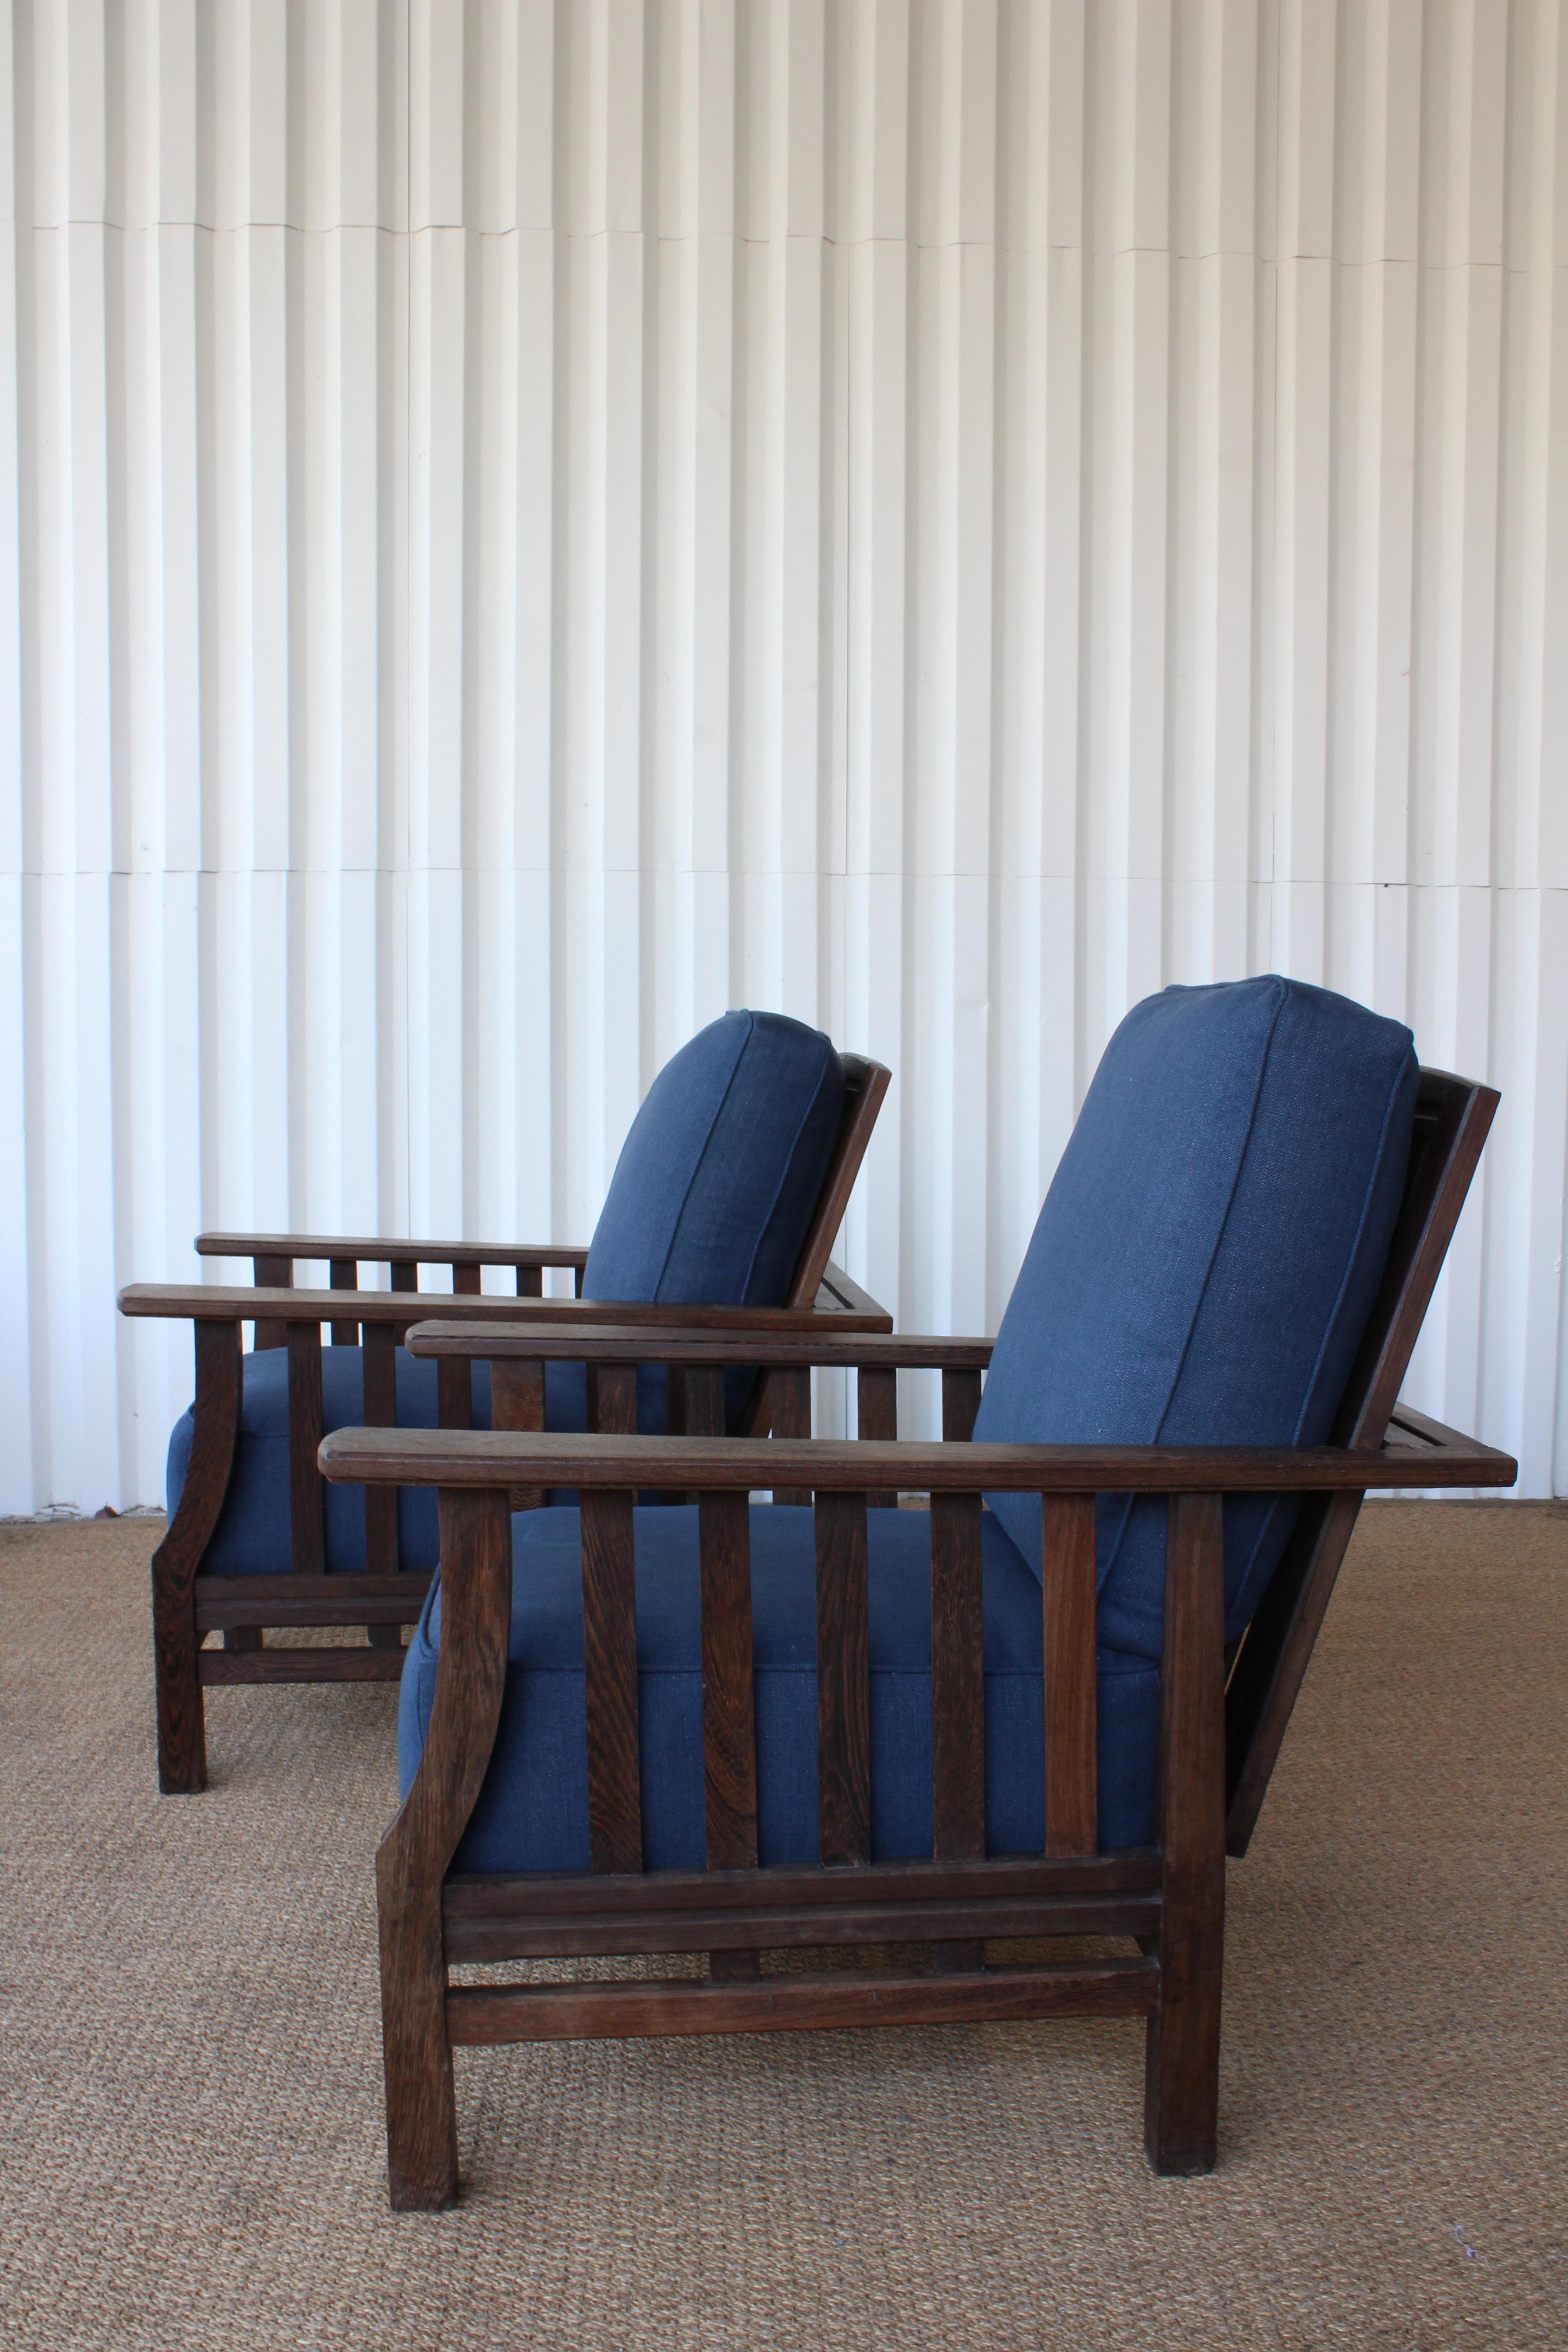 French Pair of African Wenge Wood Deck Chairs, France, 1940s. Two Sets Available.